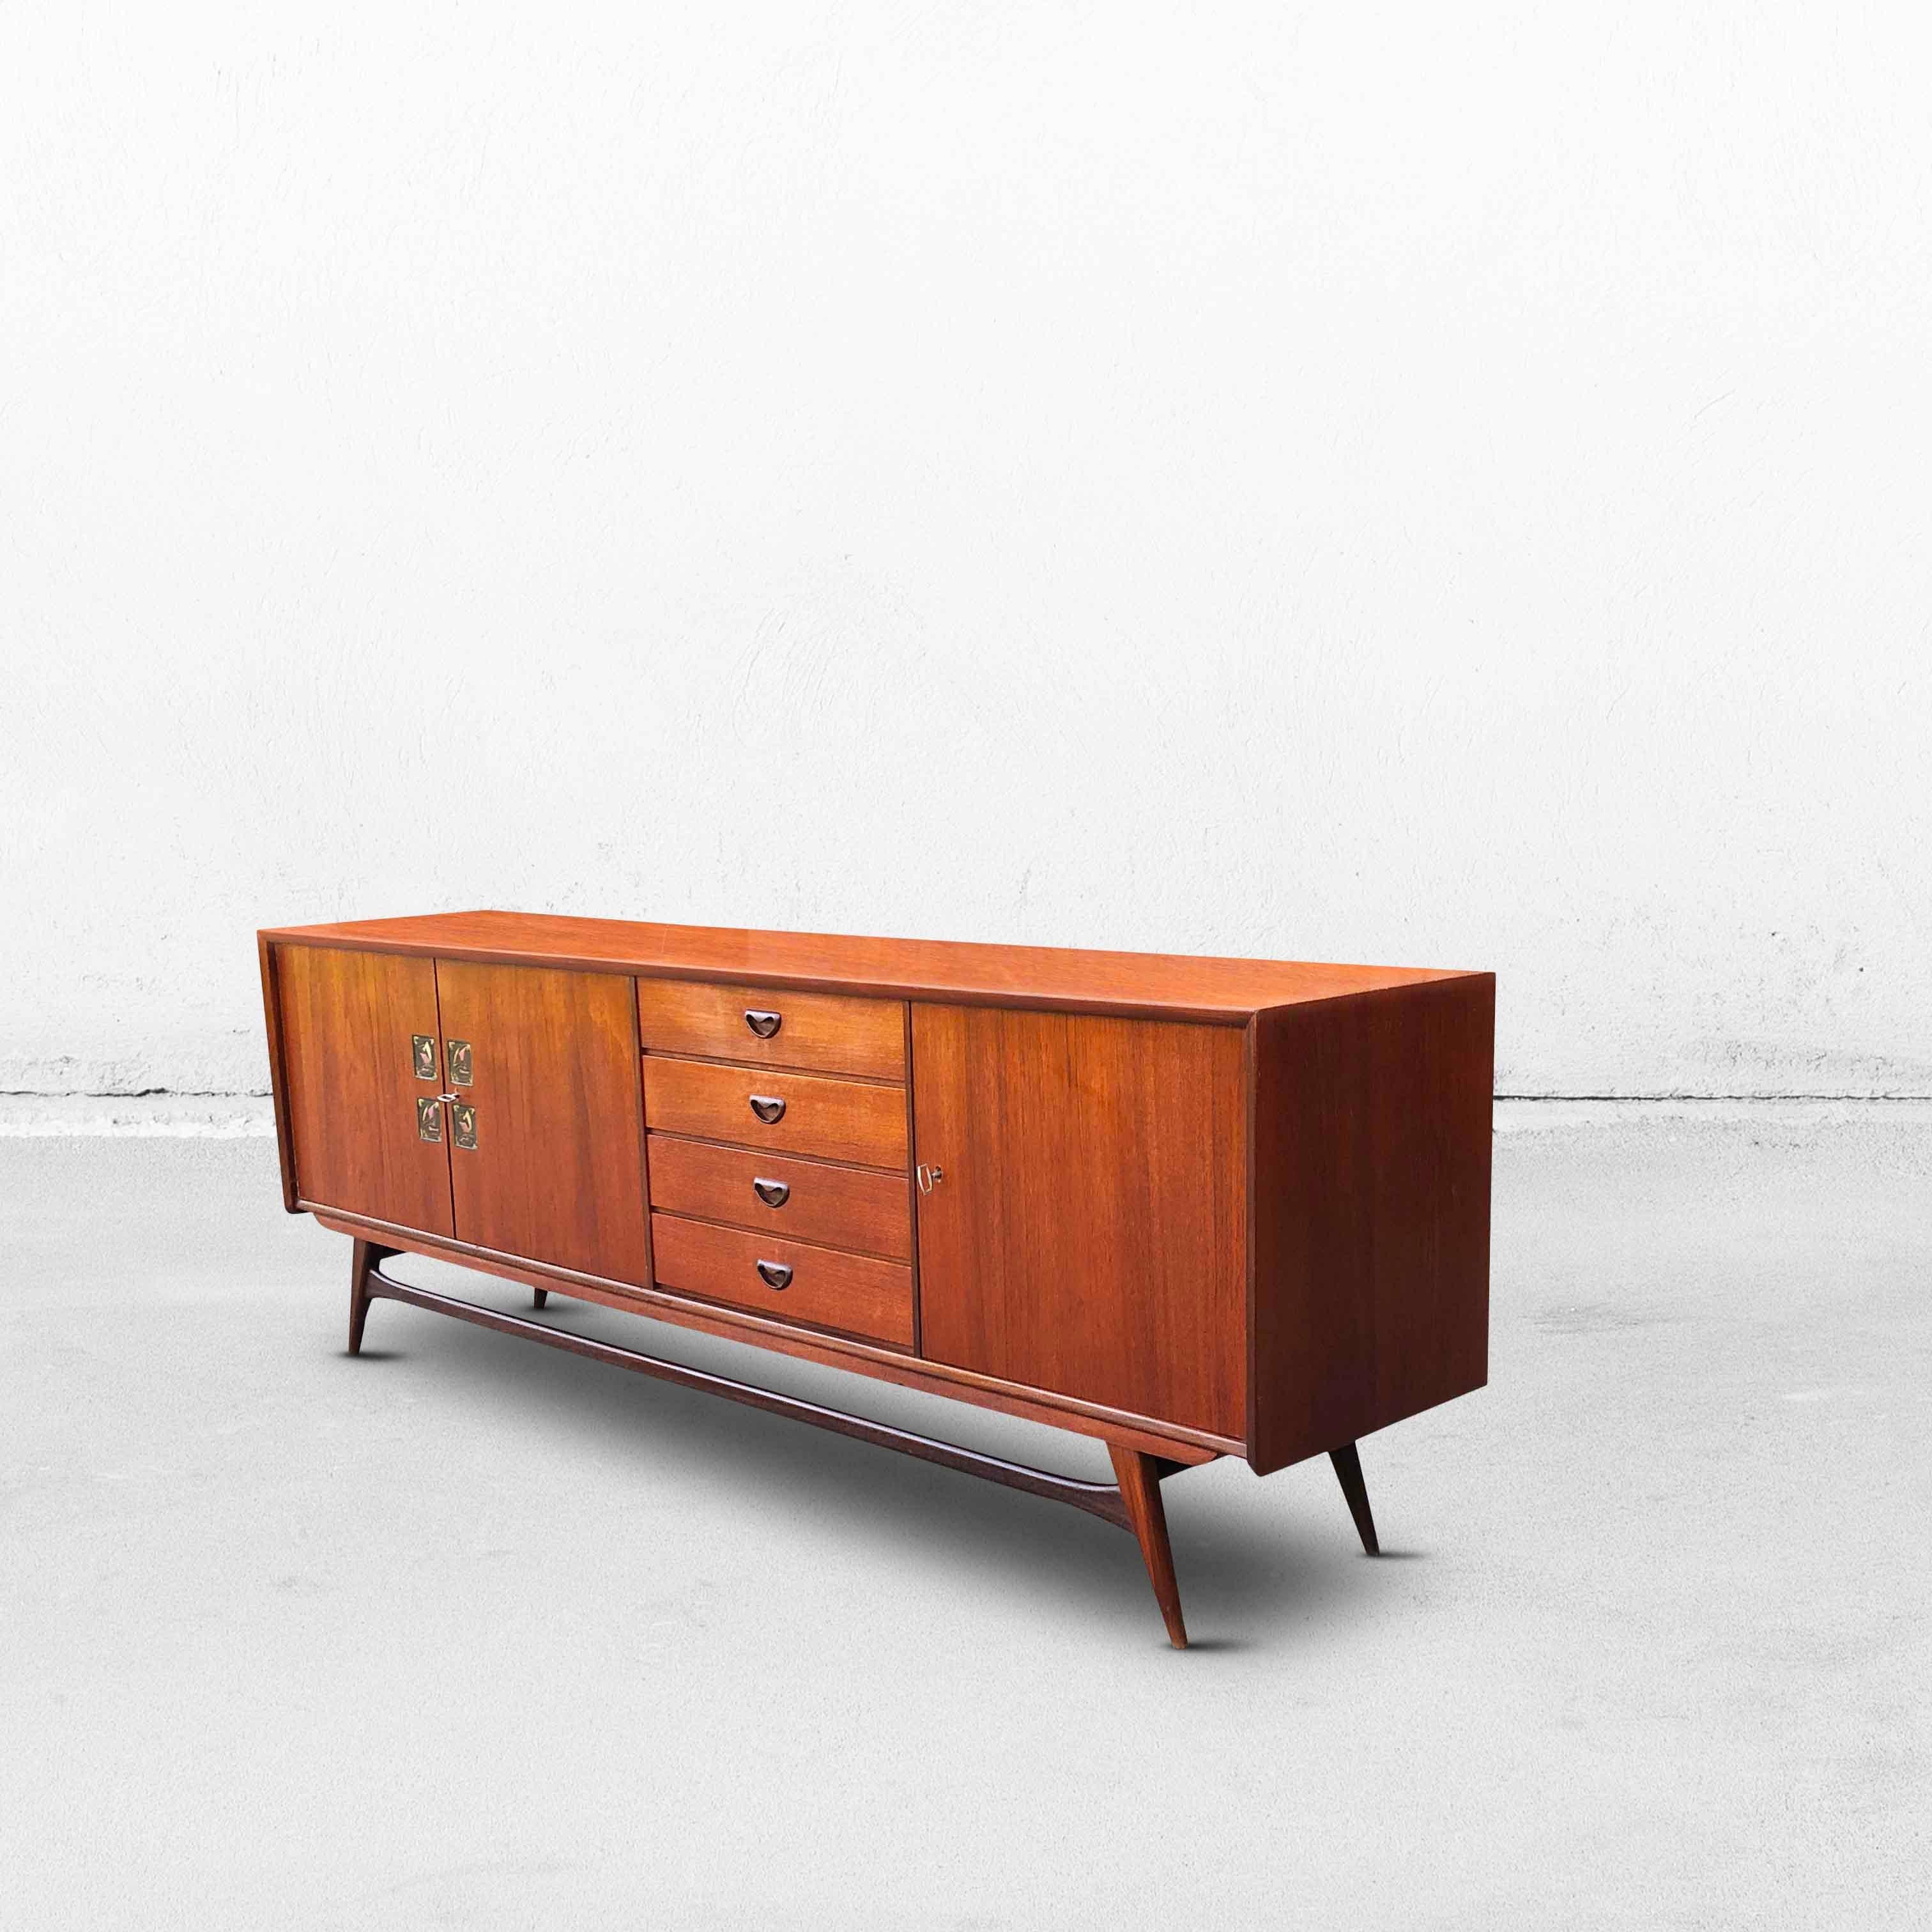 A beautiful teak sideboard by Louis Van Teeffelen for Wébé from the 1960s. The inlaid tiles were designed by Jaap Ravelli. This sideboard has a large storage compartment with a shelf, 4 drawers, and a smaller storage compartment with a shelf. The 2